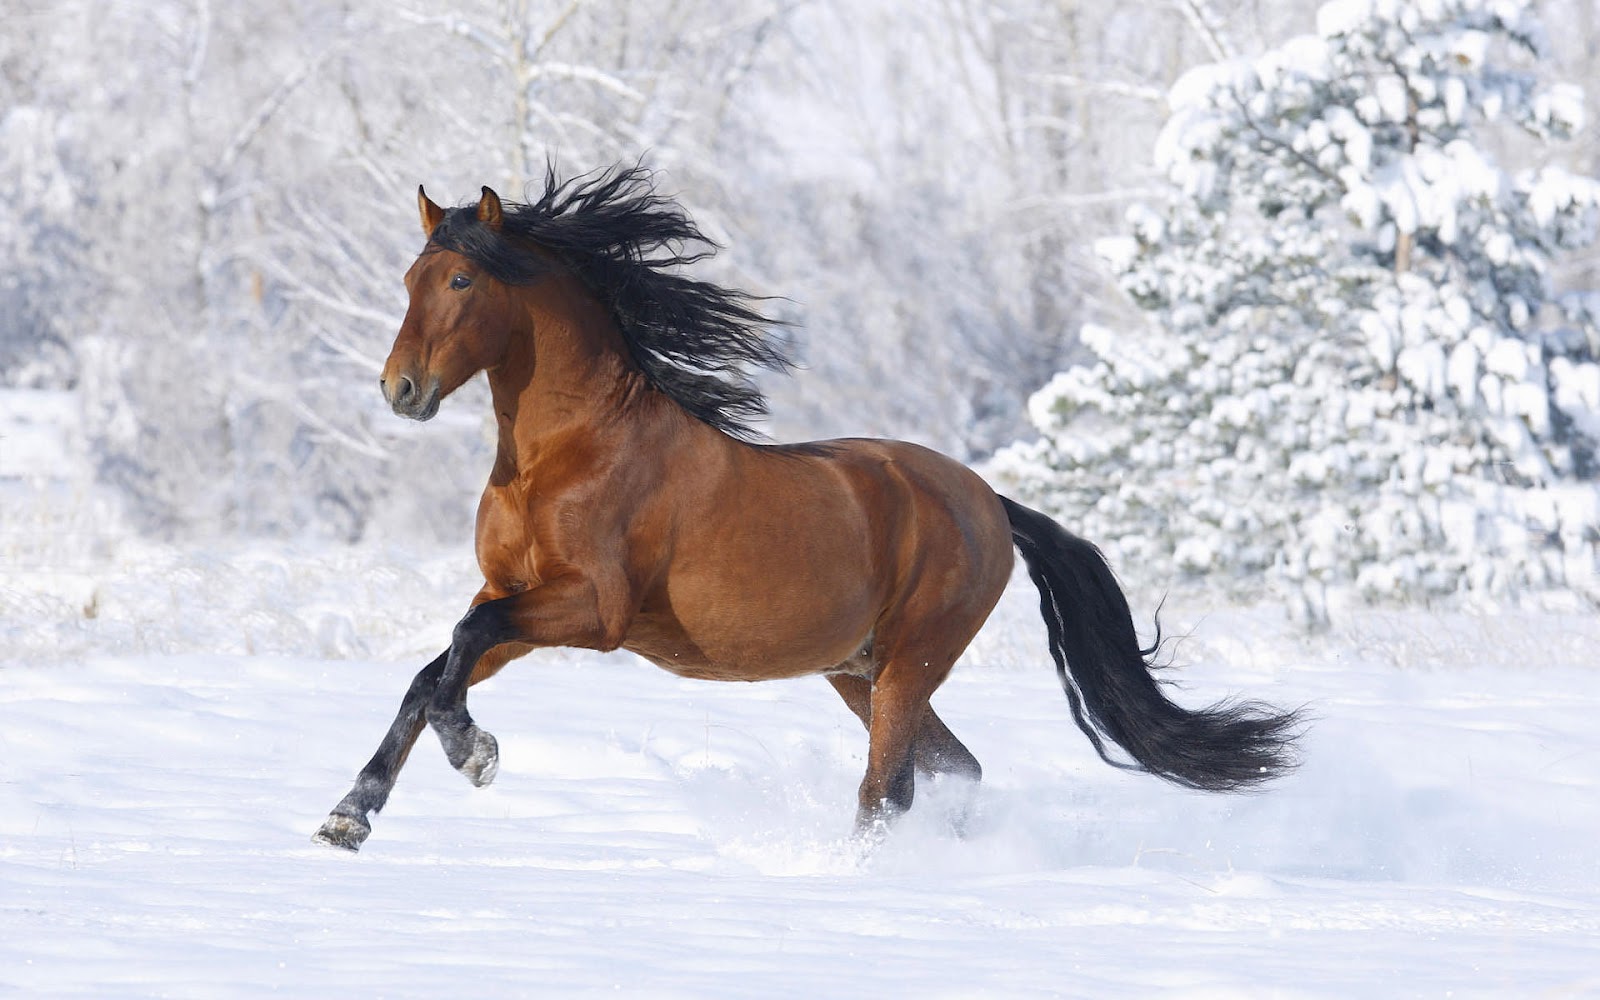 HD Animal Wallpaper Of A Brown Horse In The Snow